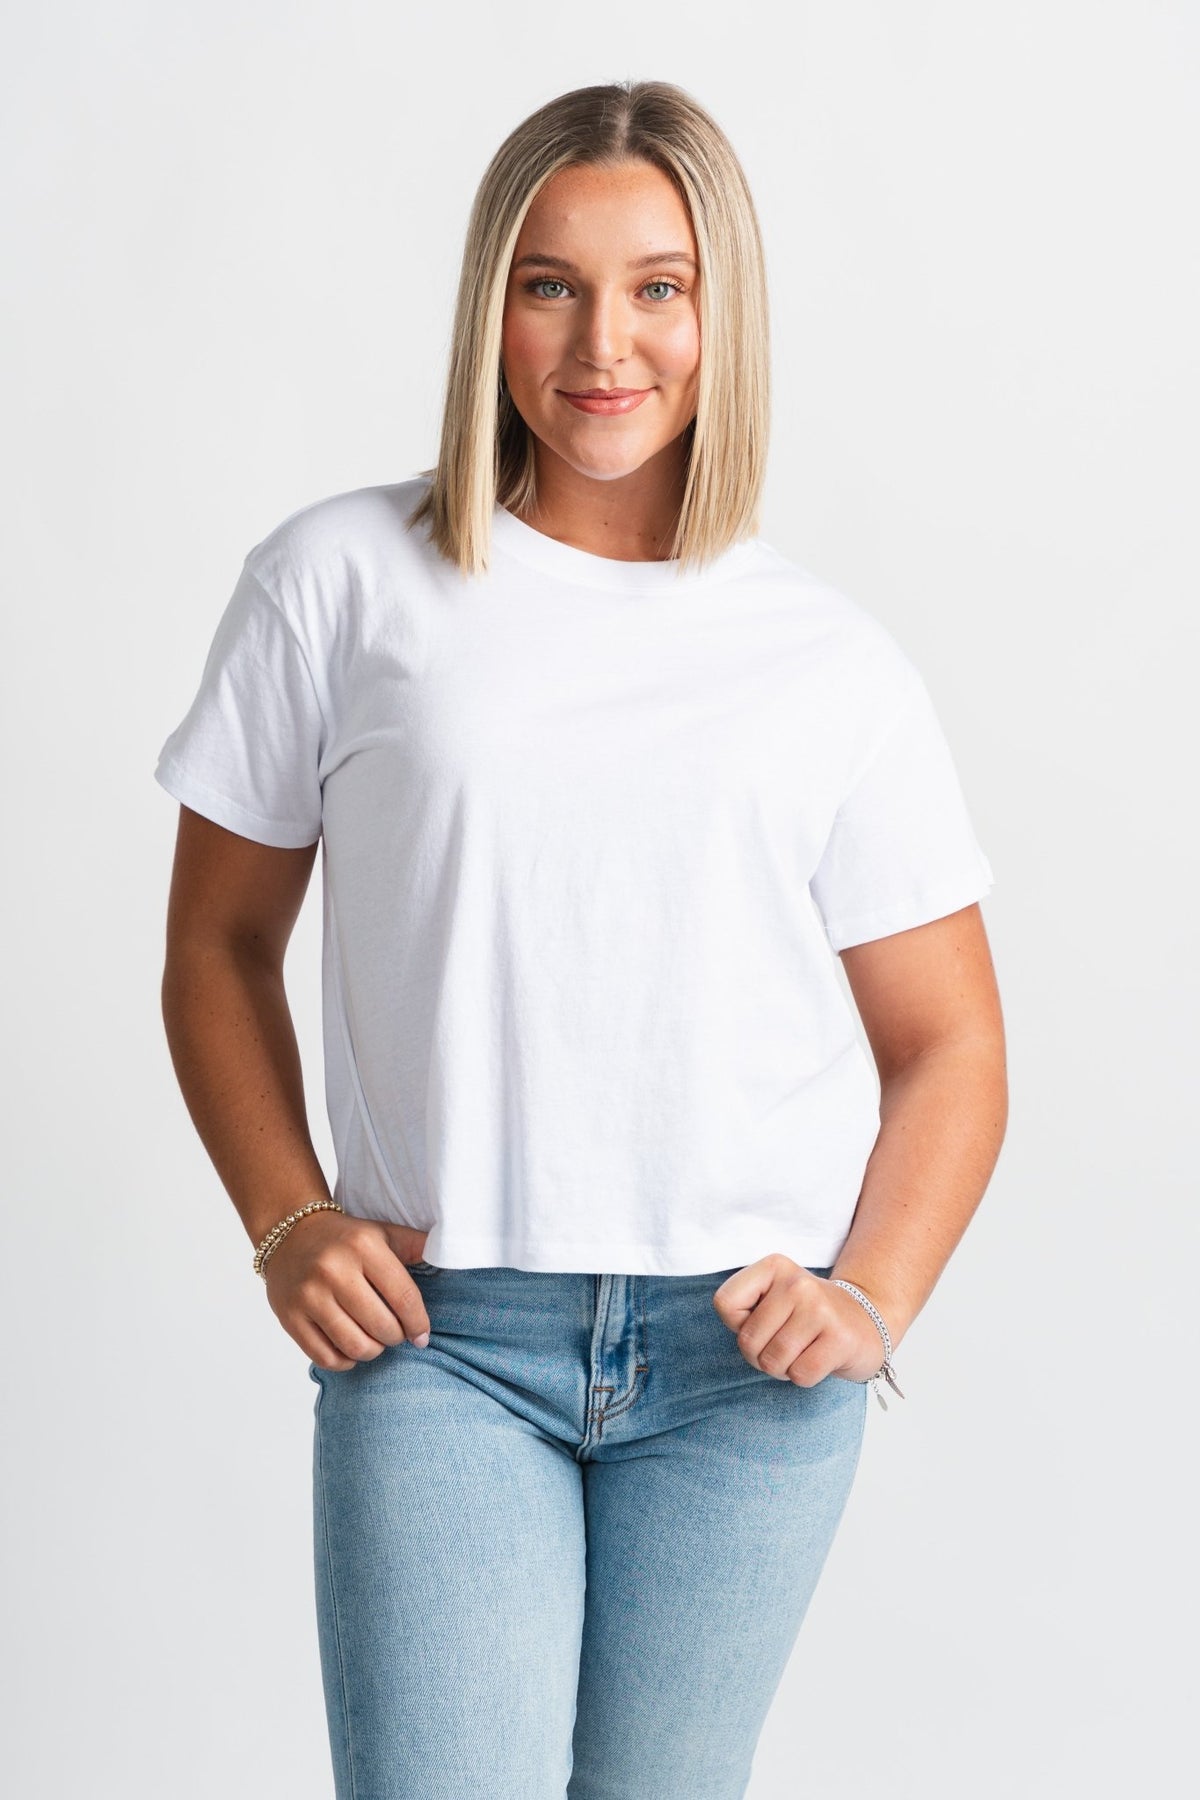 Z Supply go to basic tee white - Z Supply T-shirts - Z Supply Tops, Dresses, Tanks, Tees, Cardigans, Joggers and Loungewear at Lush Fashion Lounge